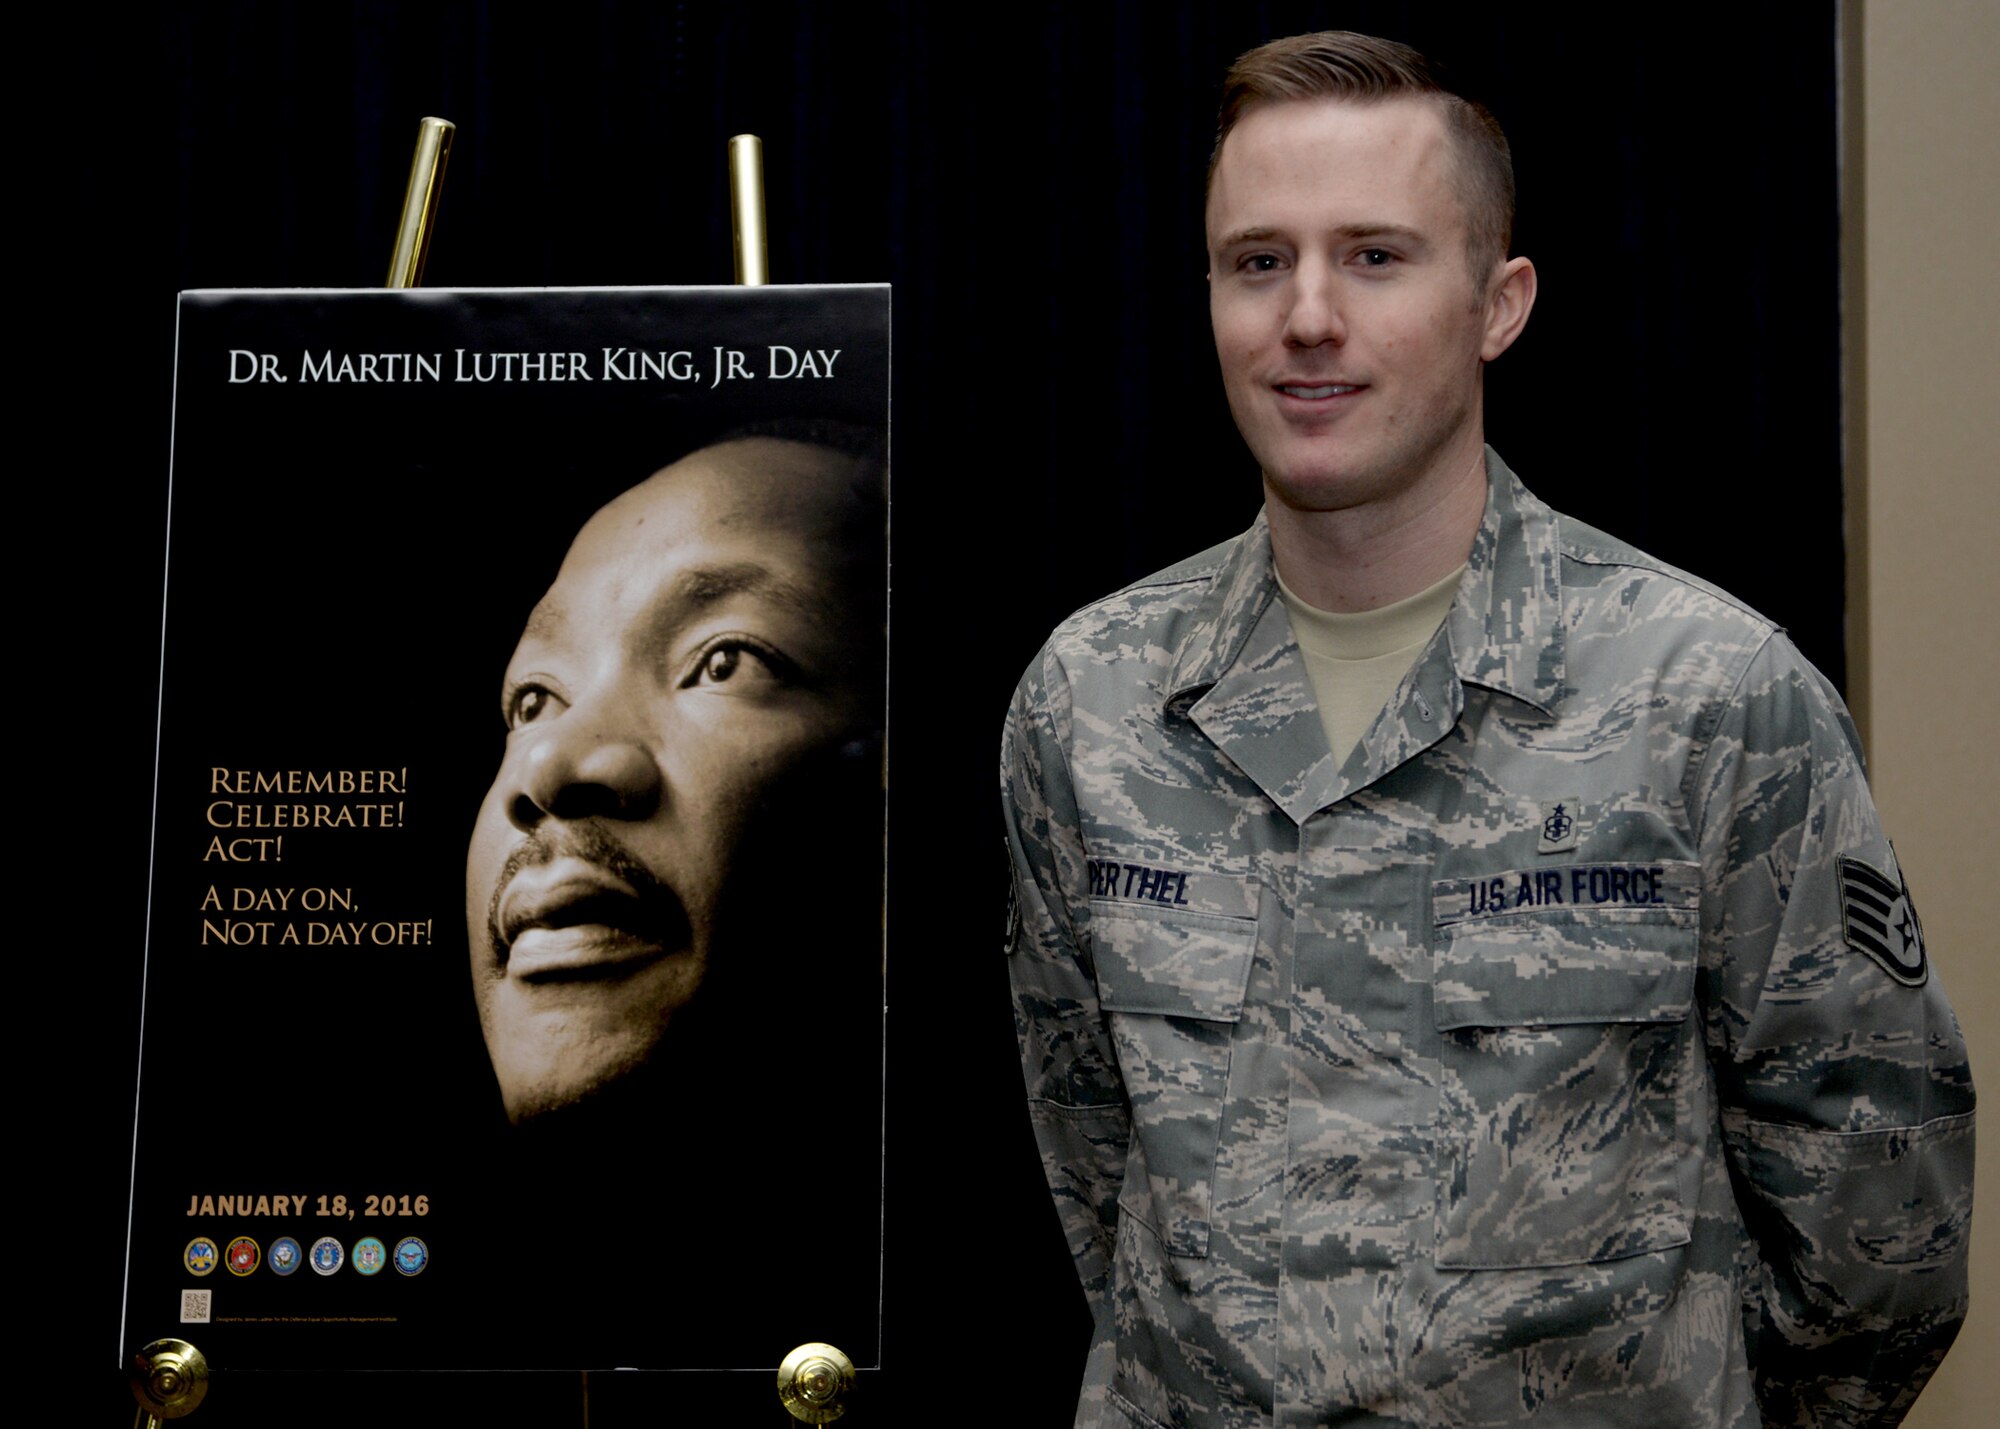 Staff Sgt. Erik Perthel, 28th Medical Operations Squadron public health technician, stands in front of the Martin Luther King, Jr. Day of Observance poster at Ellsworth Air Force Base, S.D., Jan. 12, 2016. Perthel spoke on the importance of MLK Jr. Day of Observance and diversity during a recognition event. (U.S. Air Force photo by Airman Sadie Colbert/Released)